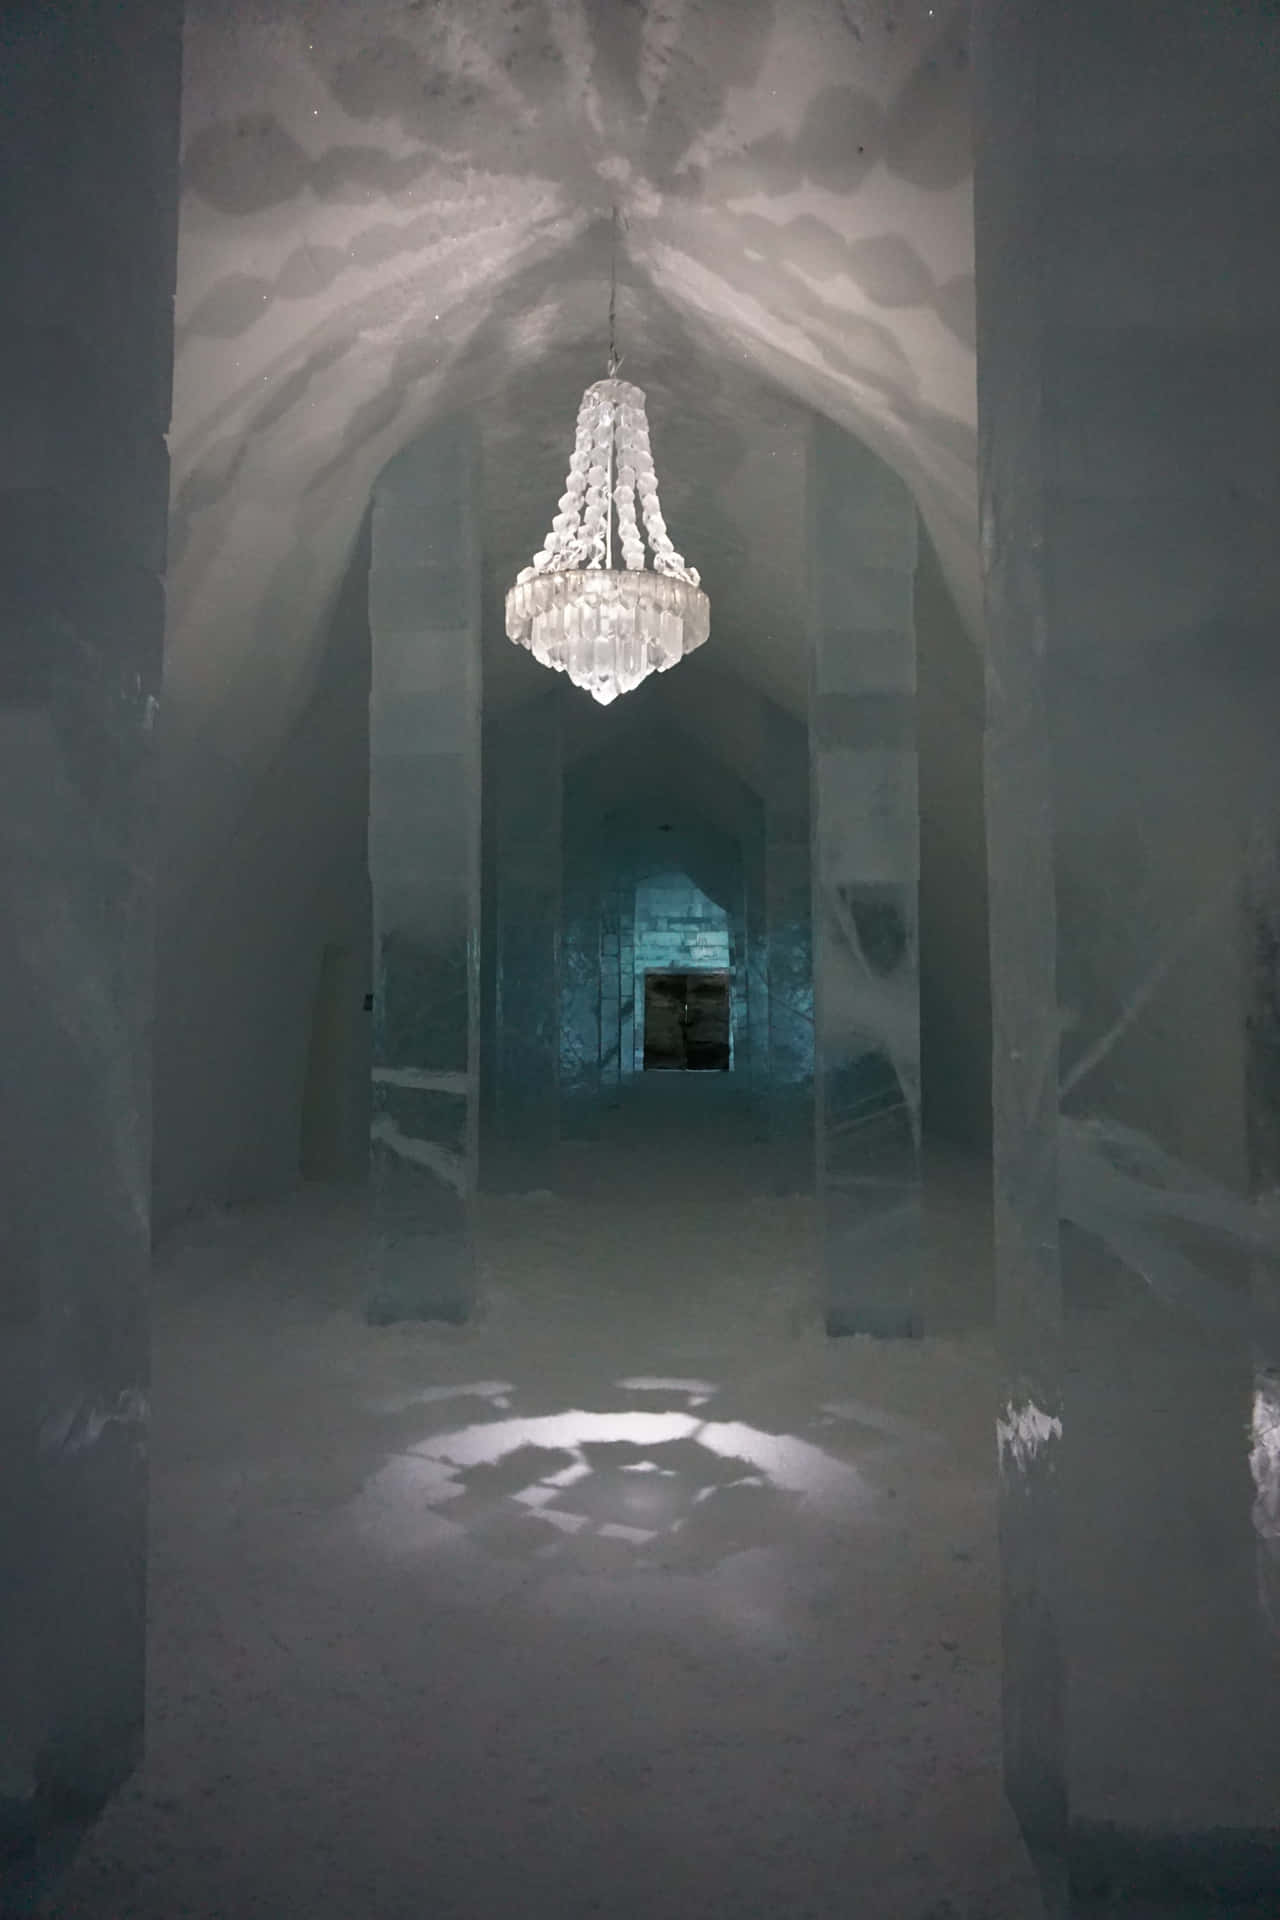 A magnificent ice hotel room, decorated with intricate ice sculptures and illuminated by a soft blue light. Wallpaper